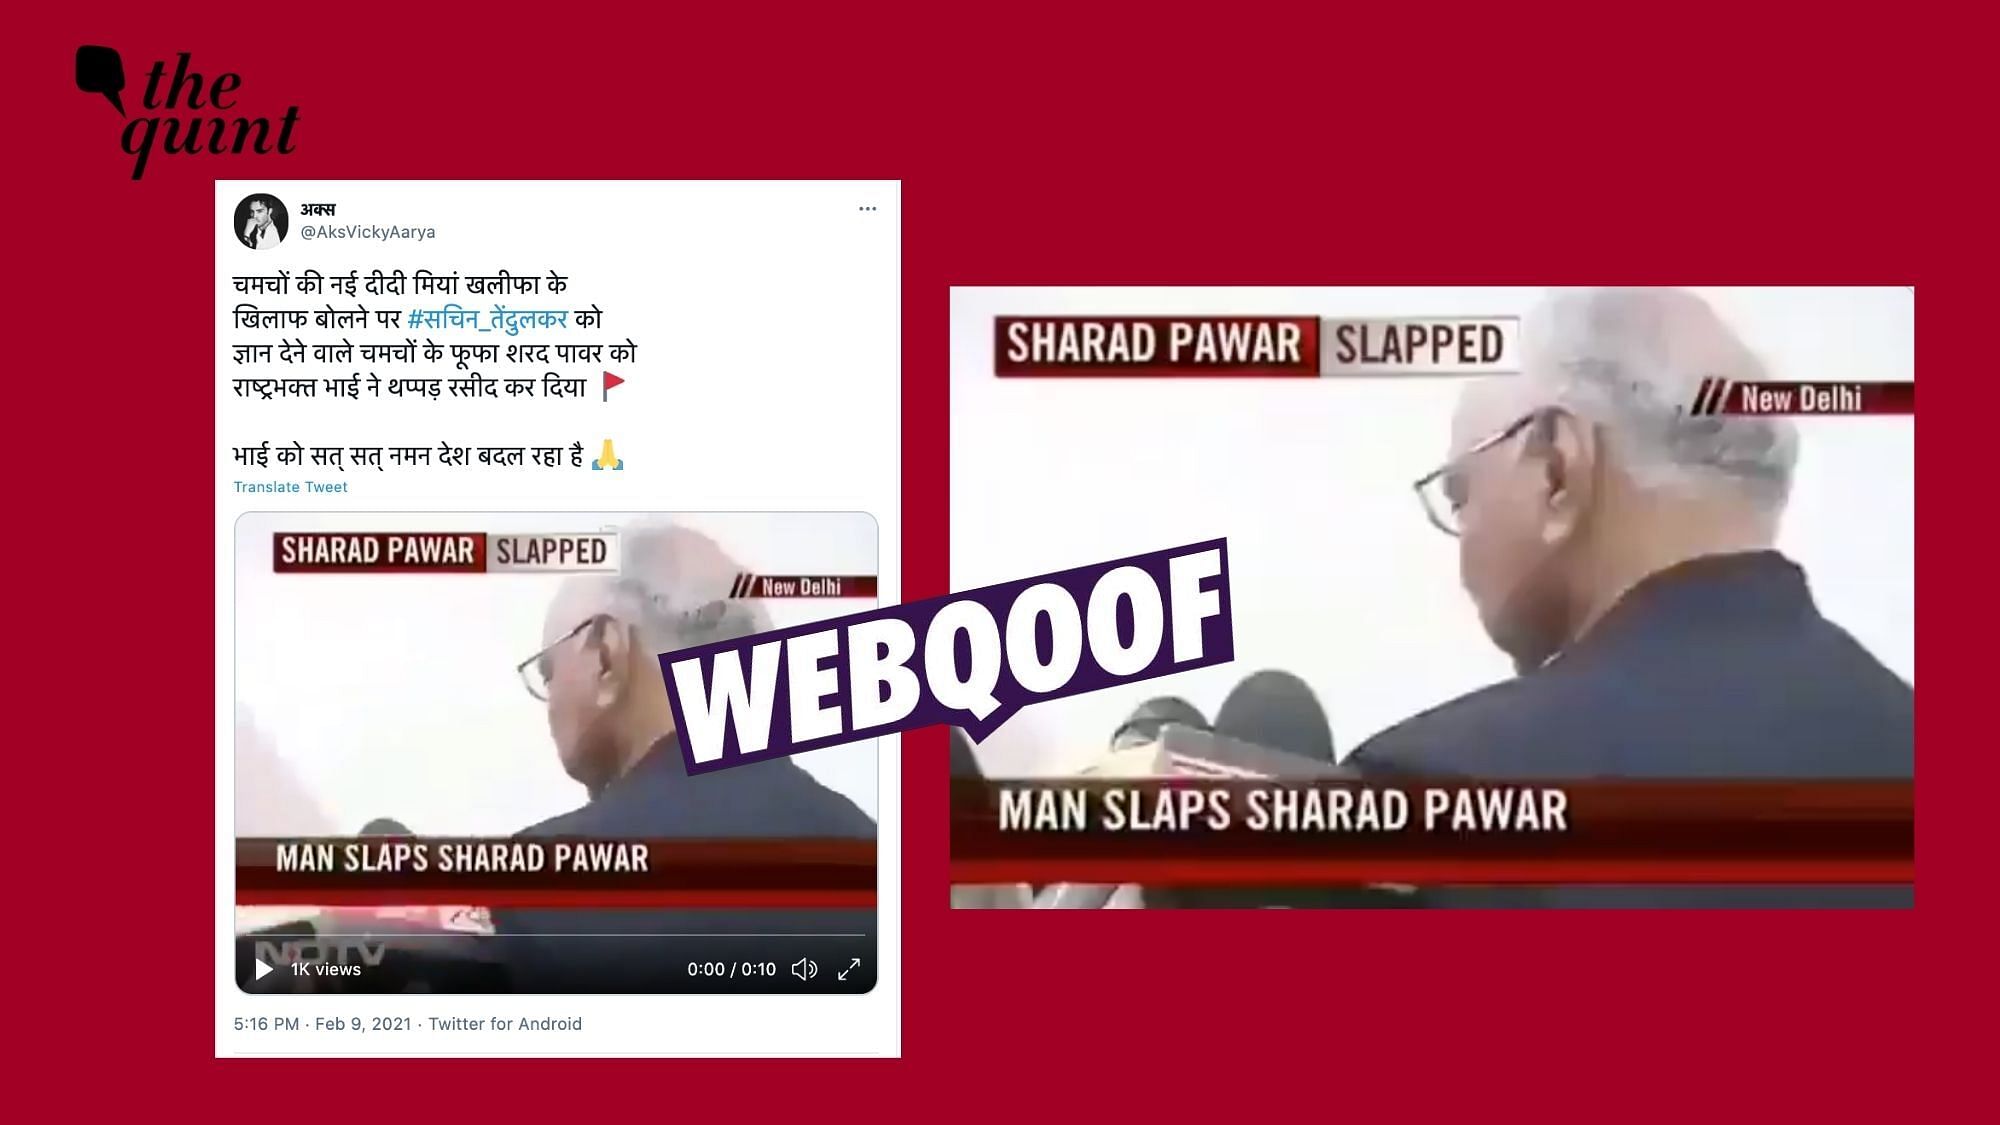 The video is from 2011 when Sharad Pawar, who was the then union agriculture minister, was slapped by a person in Delhi.